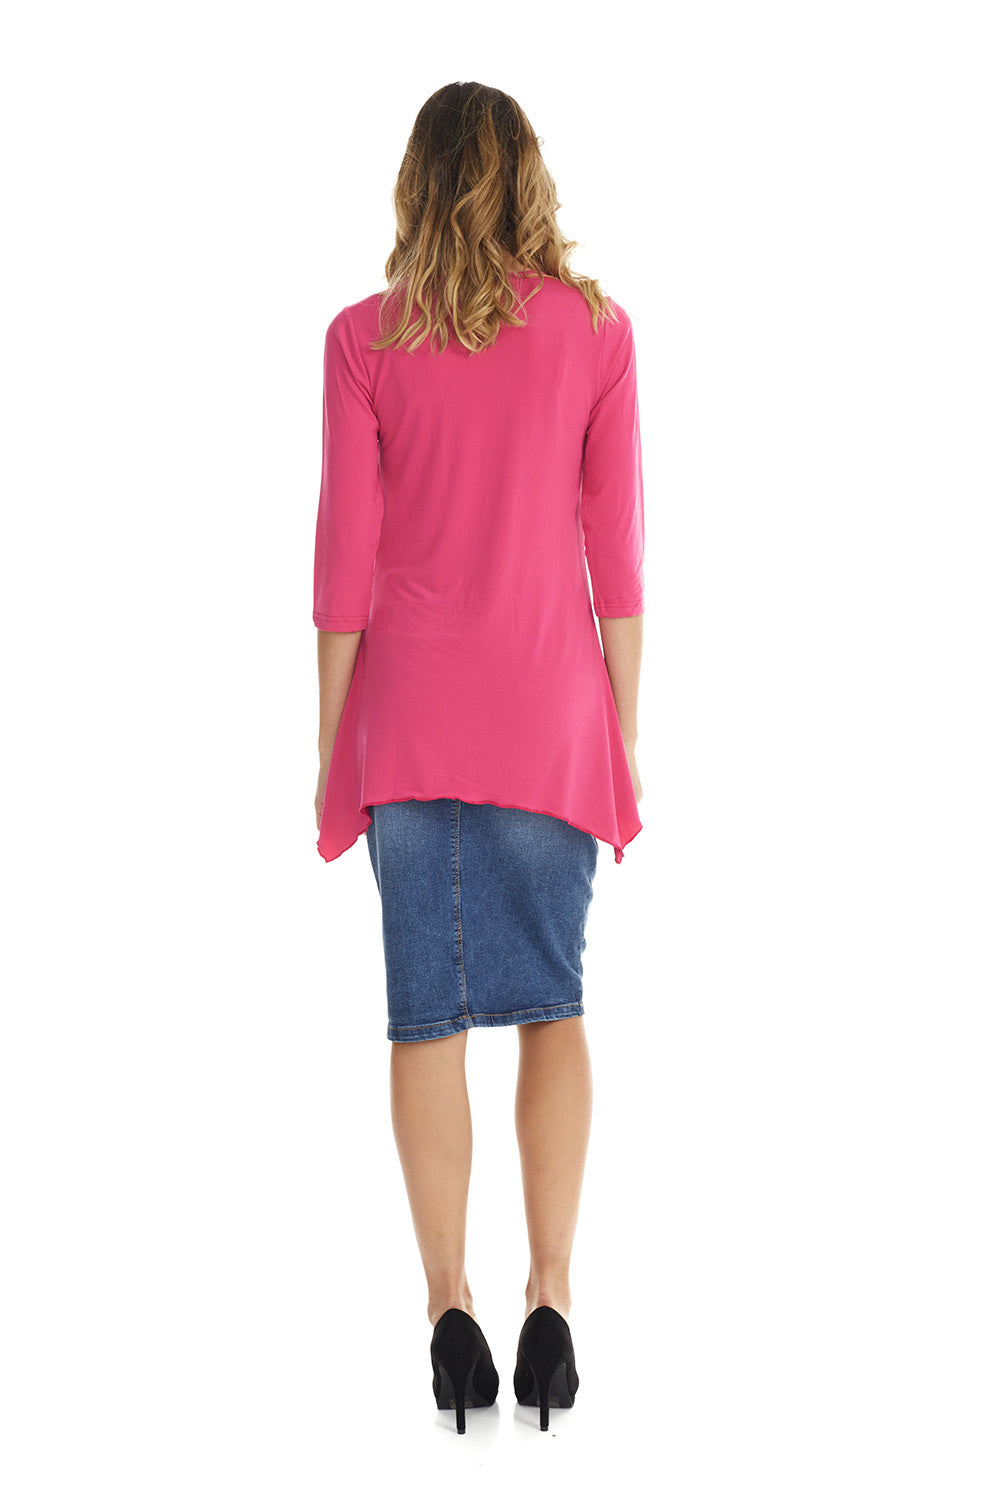 fuchsia pink silky tunic top to wear with a skirt